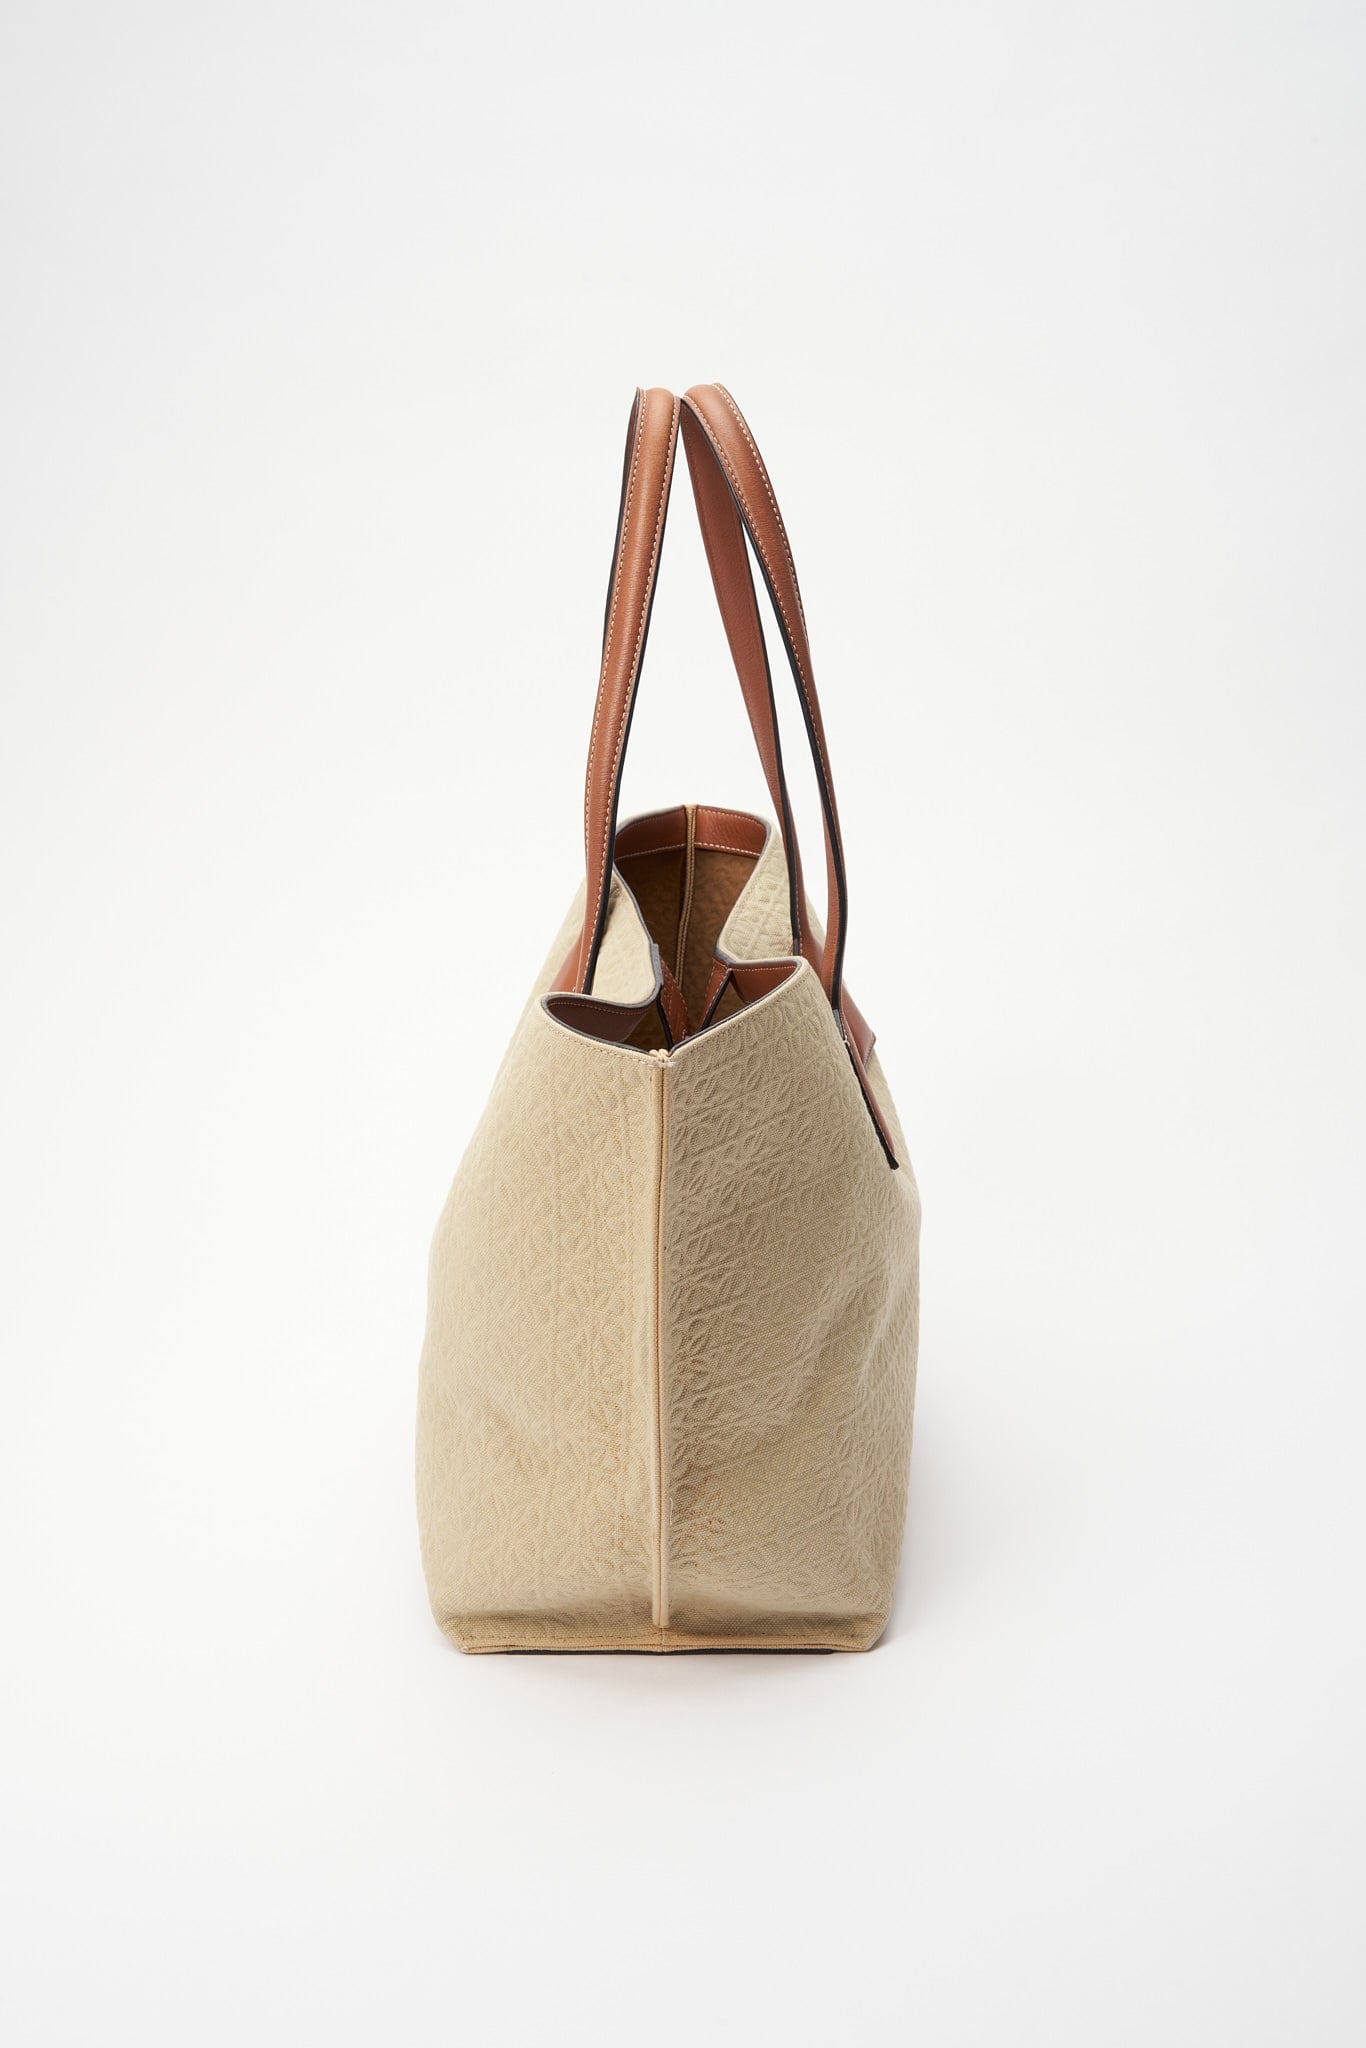 Loewe Anagram Canvas and Leather Tote Bag